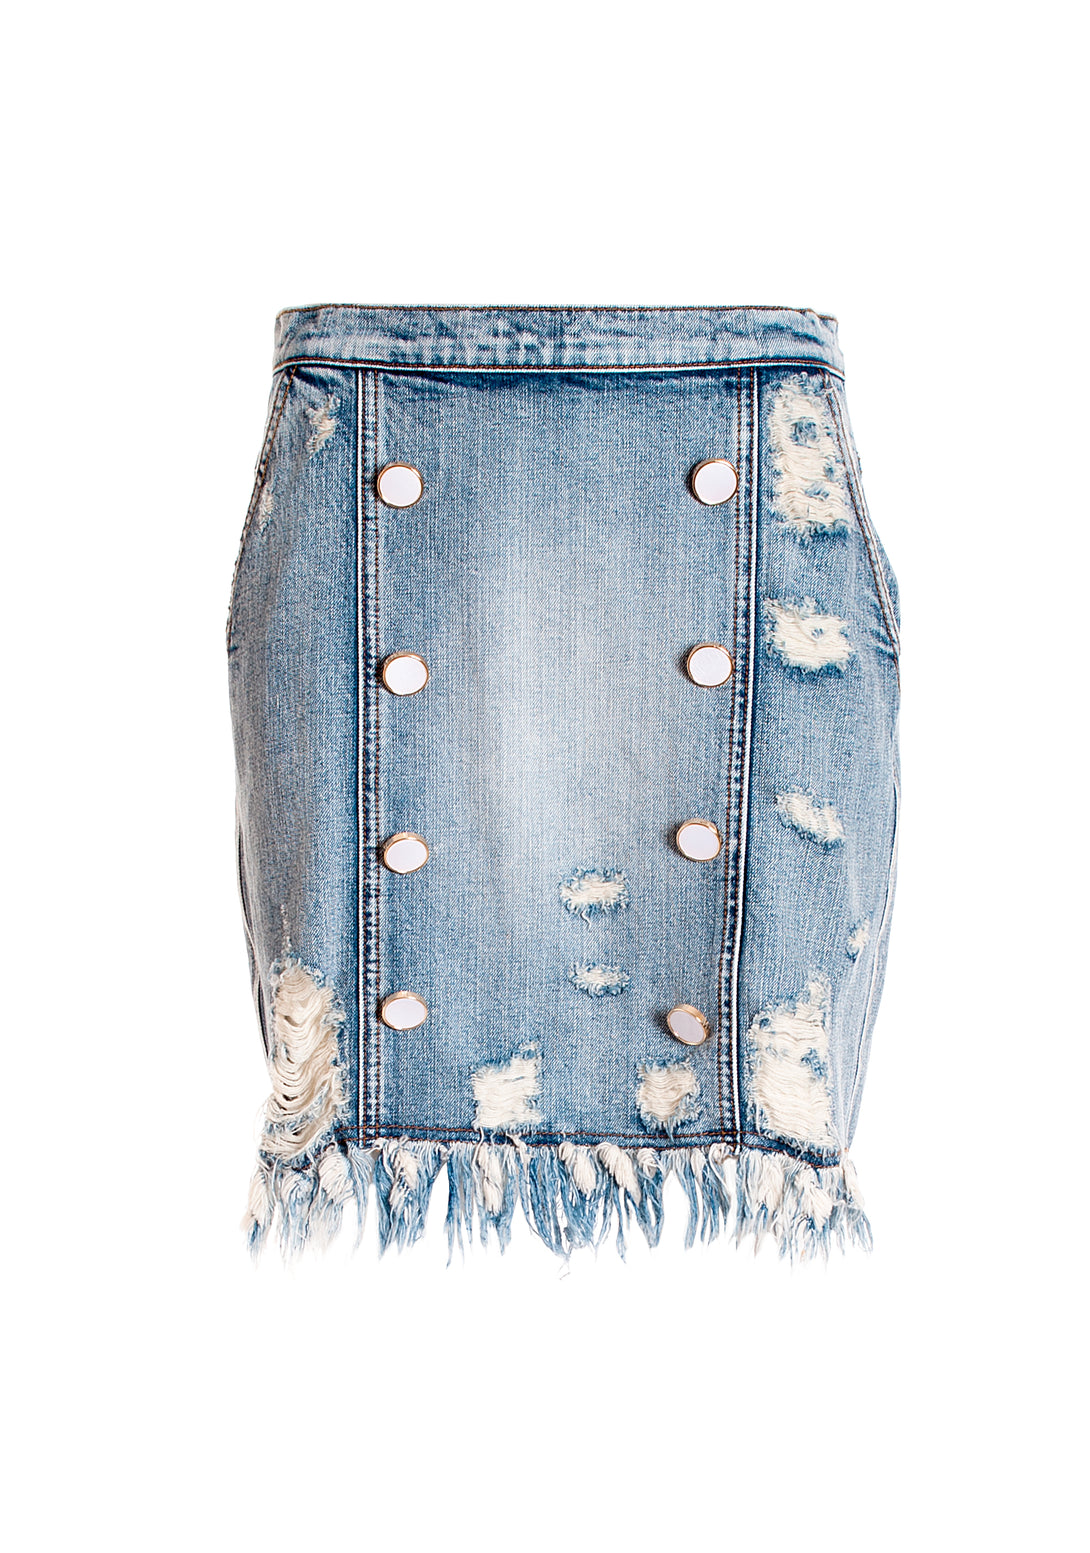 Mini skirt slim fit made in denim with middle wash